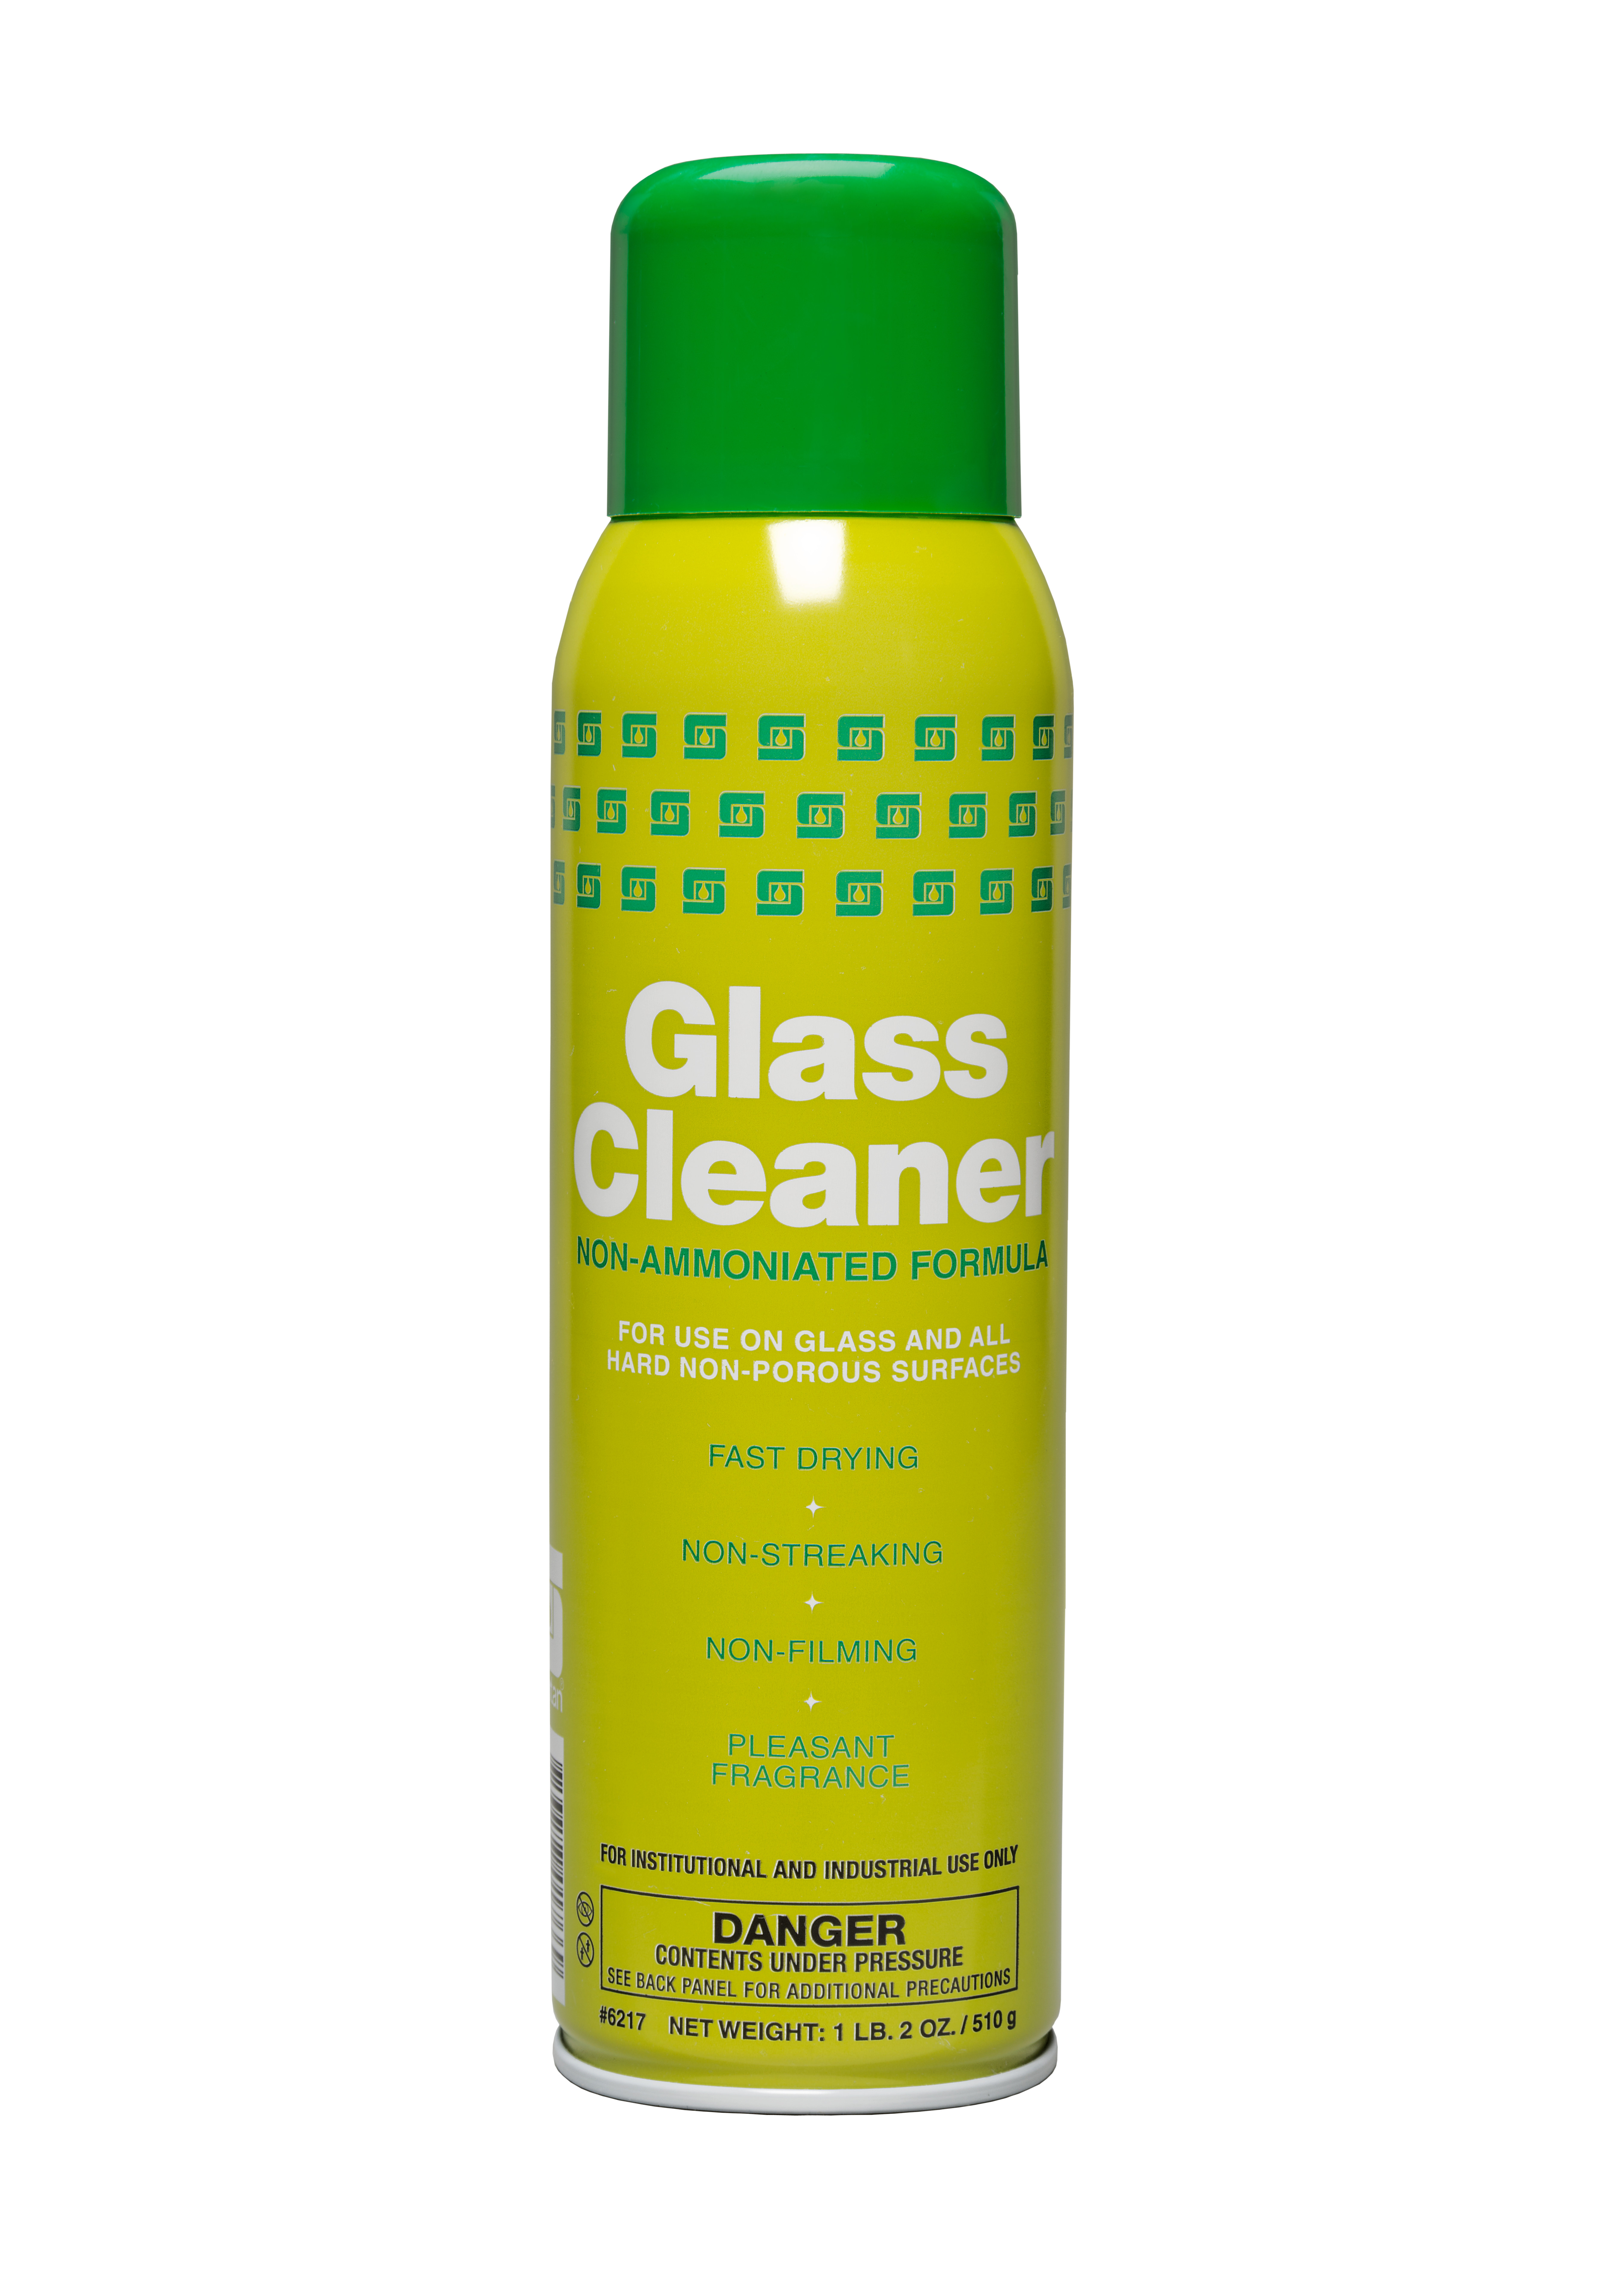 Spartan Chemical Company Glass Cleaner, 12-20 OZ.CAN